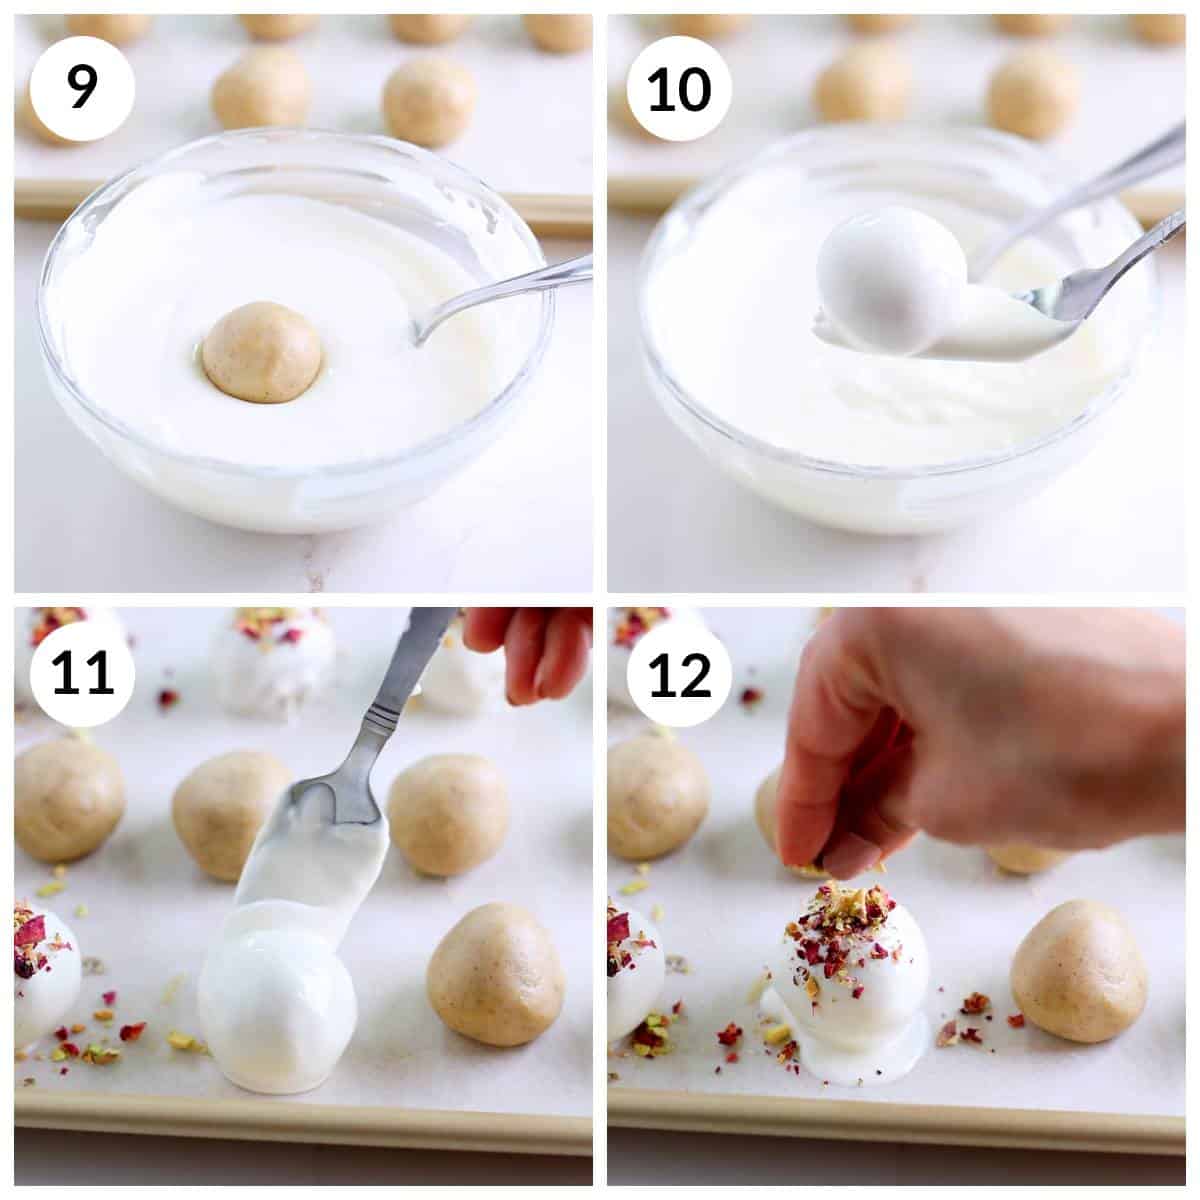 Steps for coating Thandai truffles in white chocolate and garnishing with rose petals and pistachios